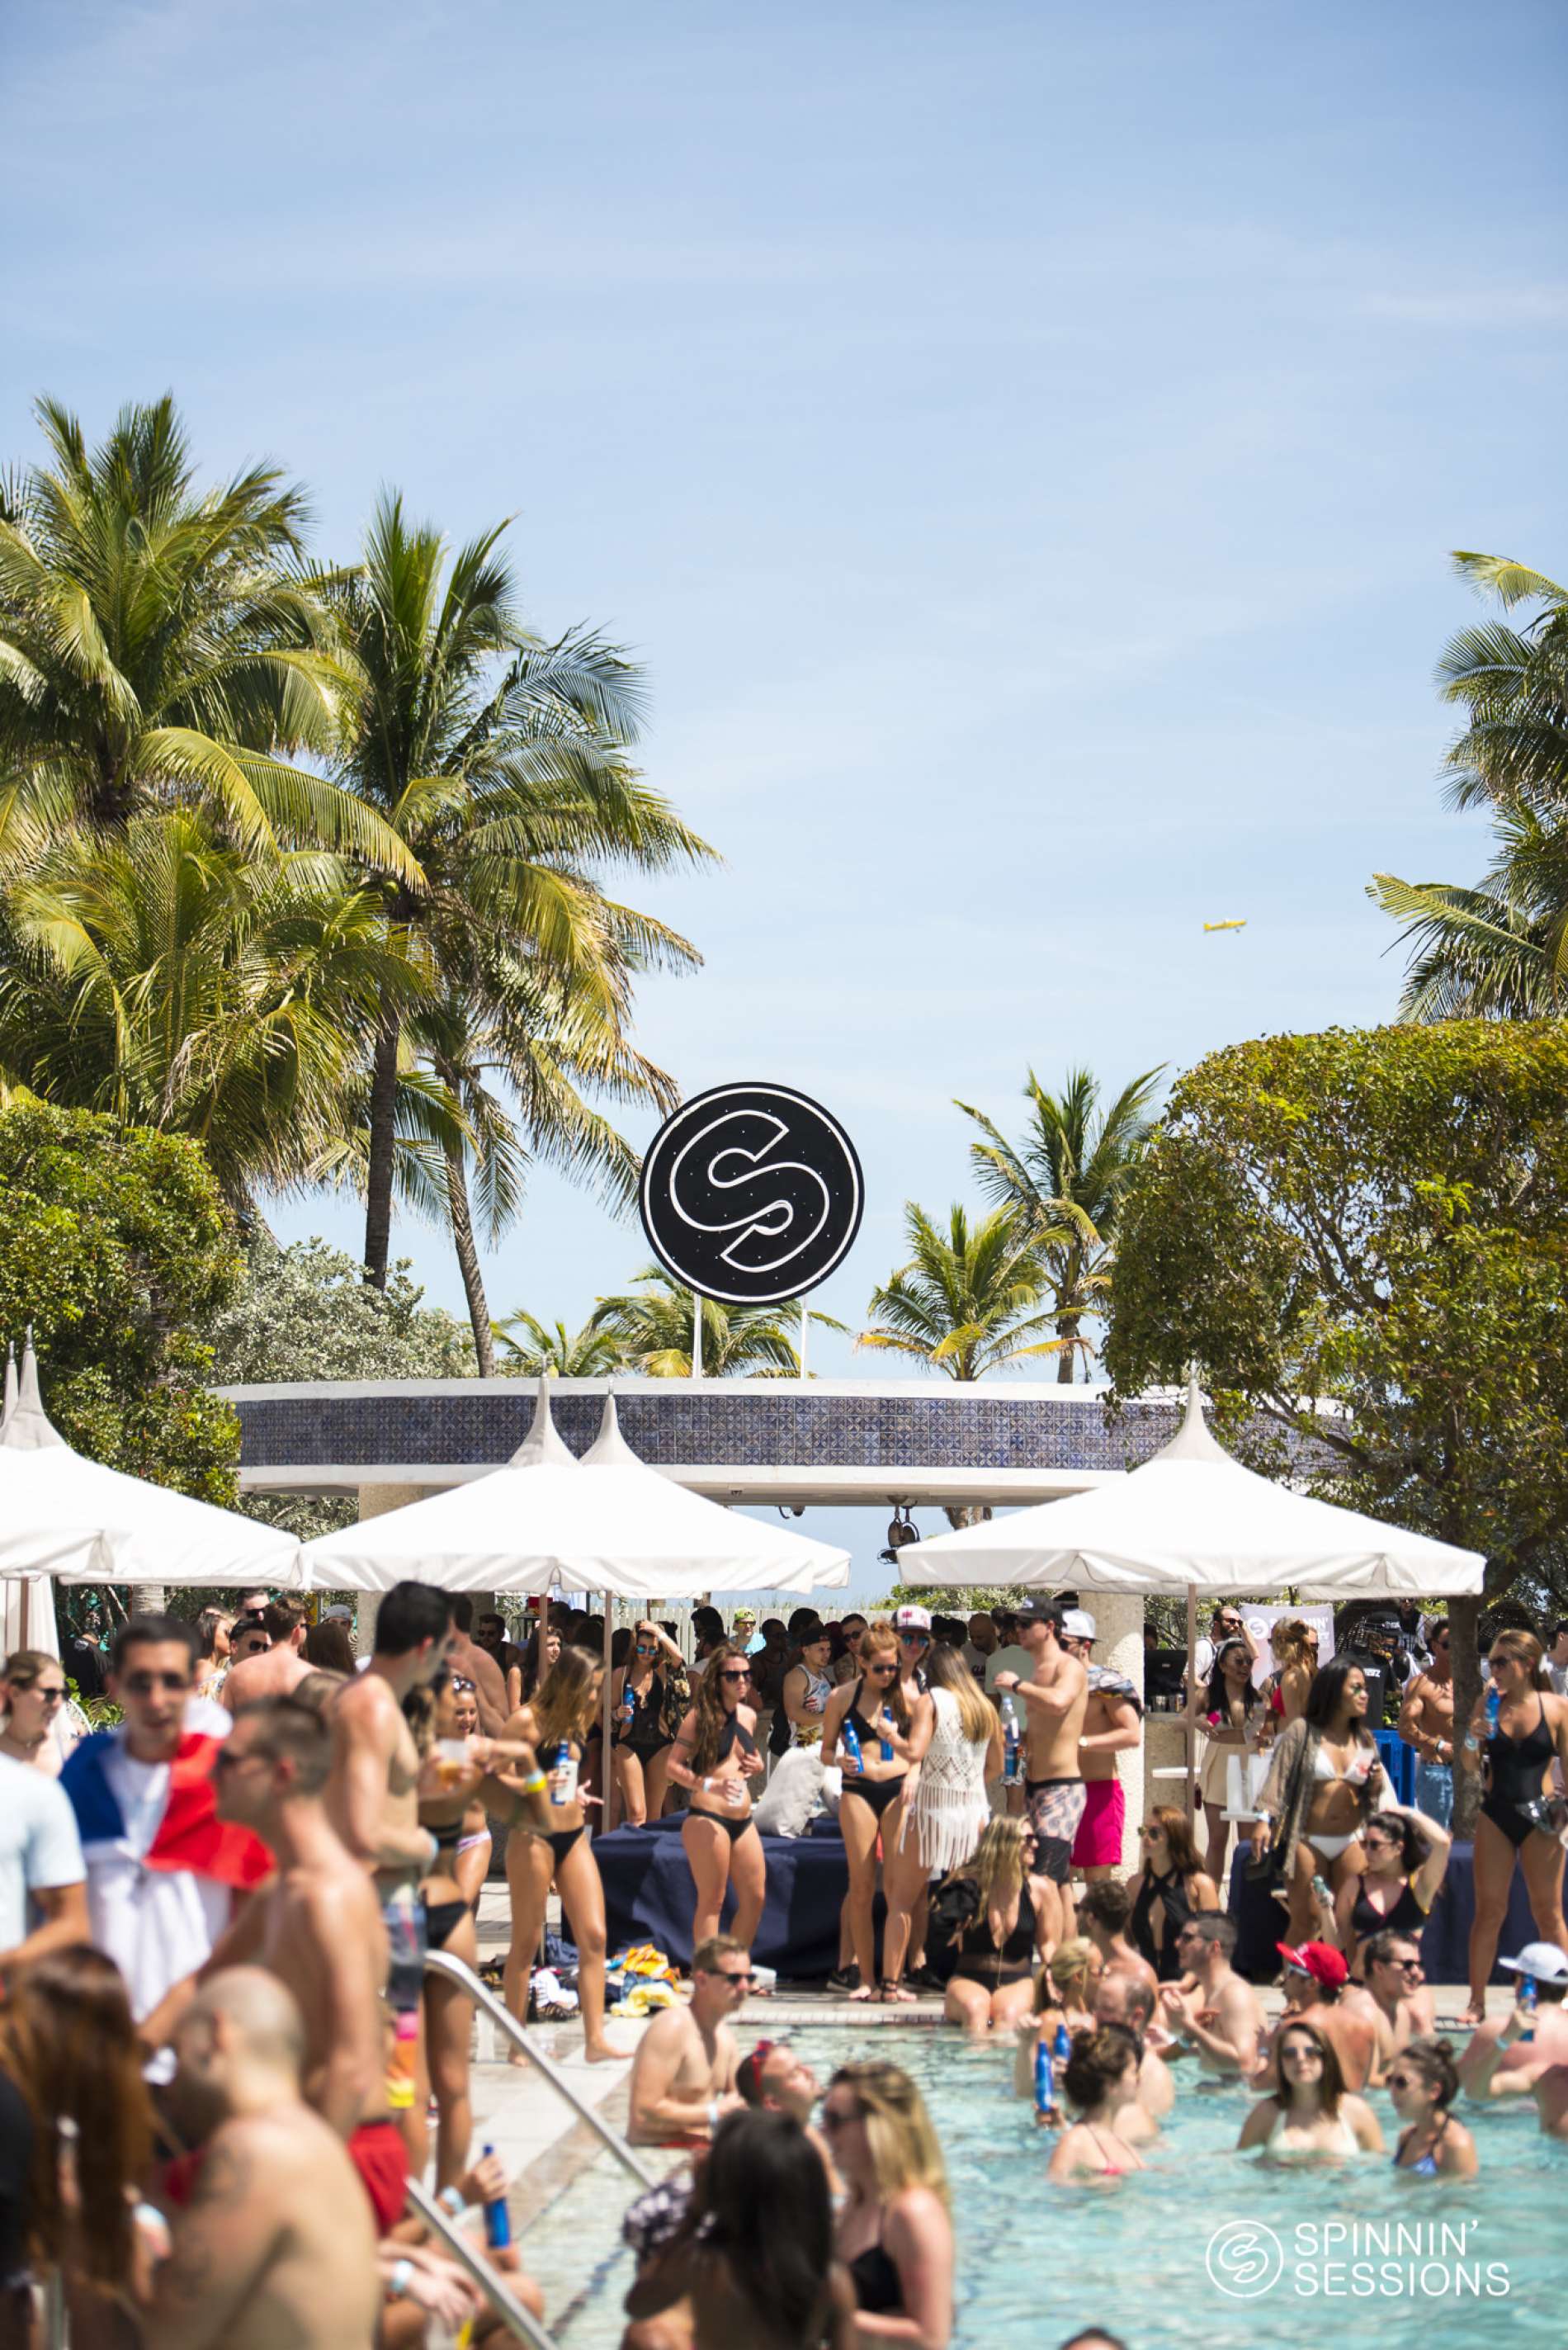 Here's what went down at Spinnin' Hotel